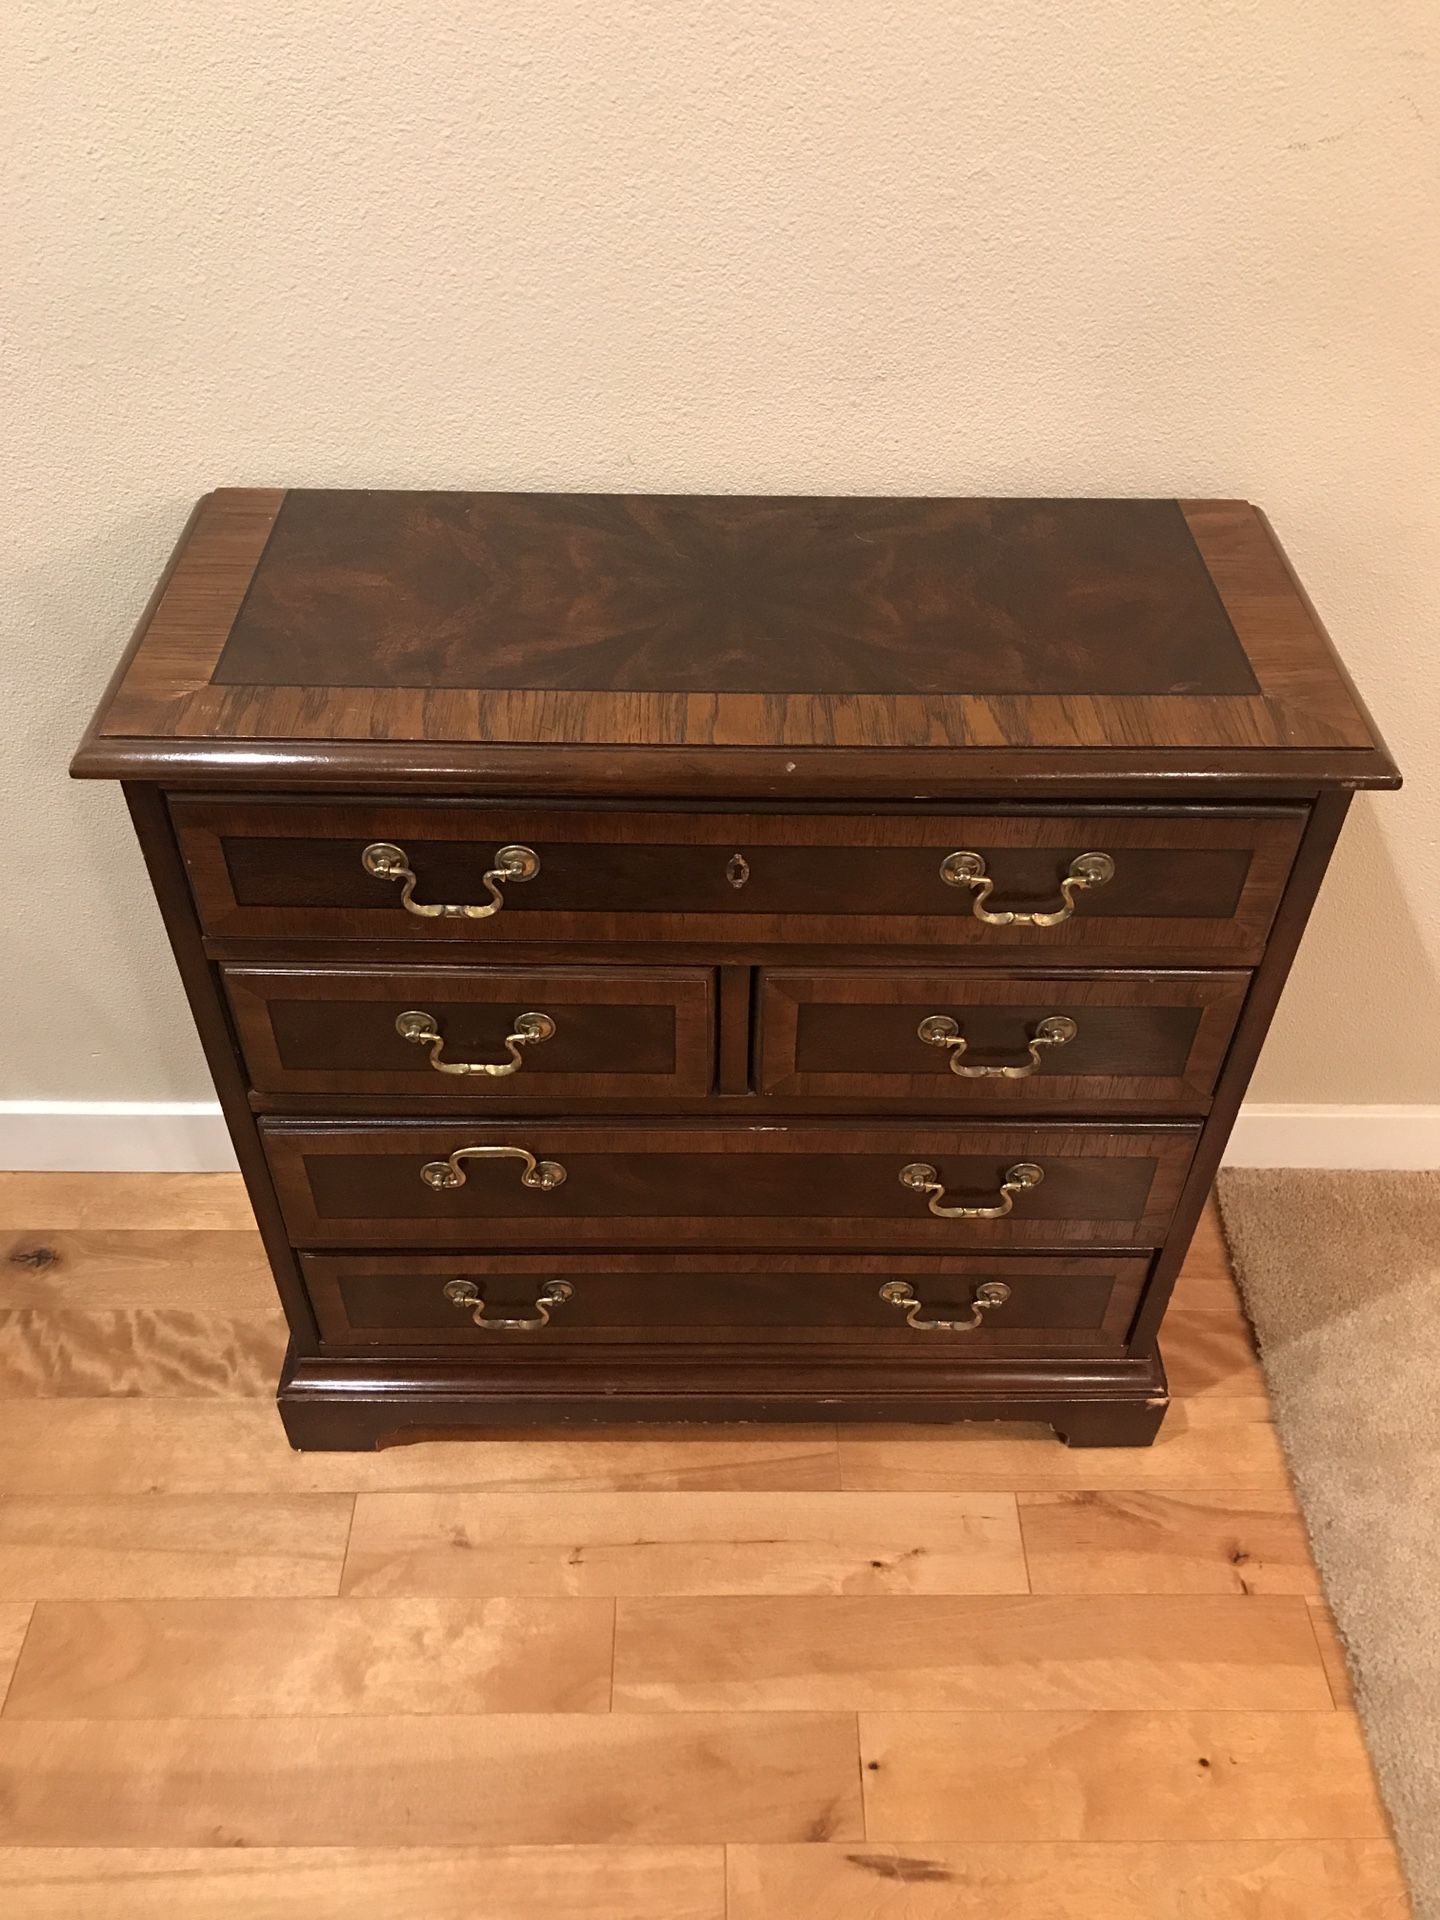 Drexel Banded Mahogany Chippendale Chest of Drawers